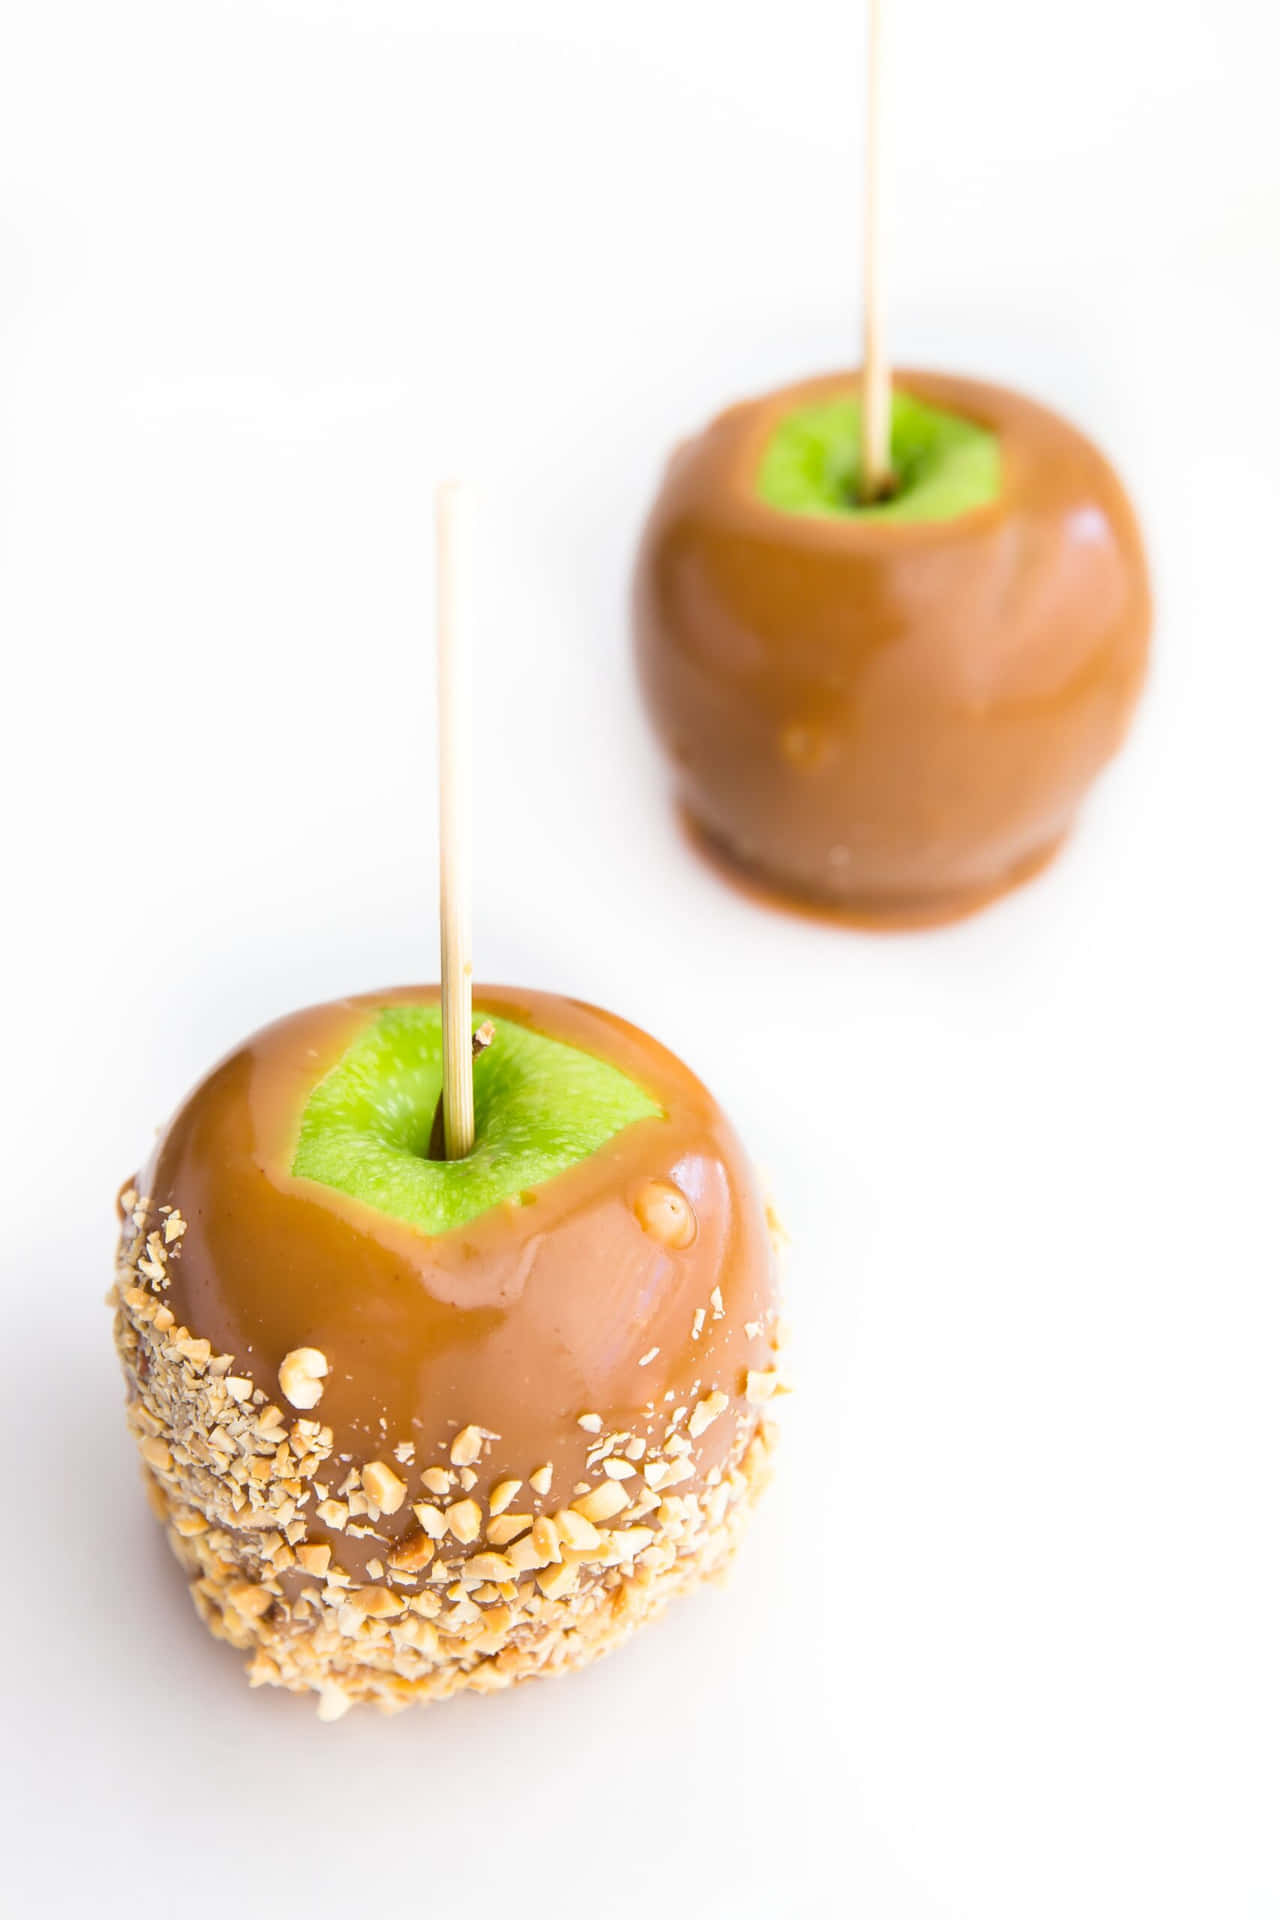 Delicious homemade caramel apples with a variety of toppings Wallpaper